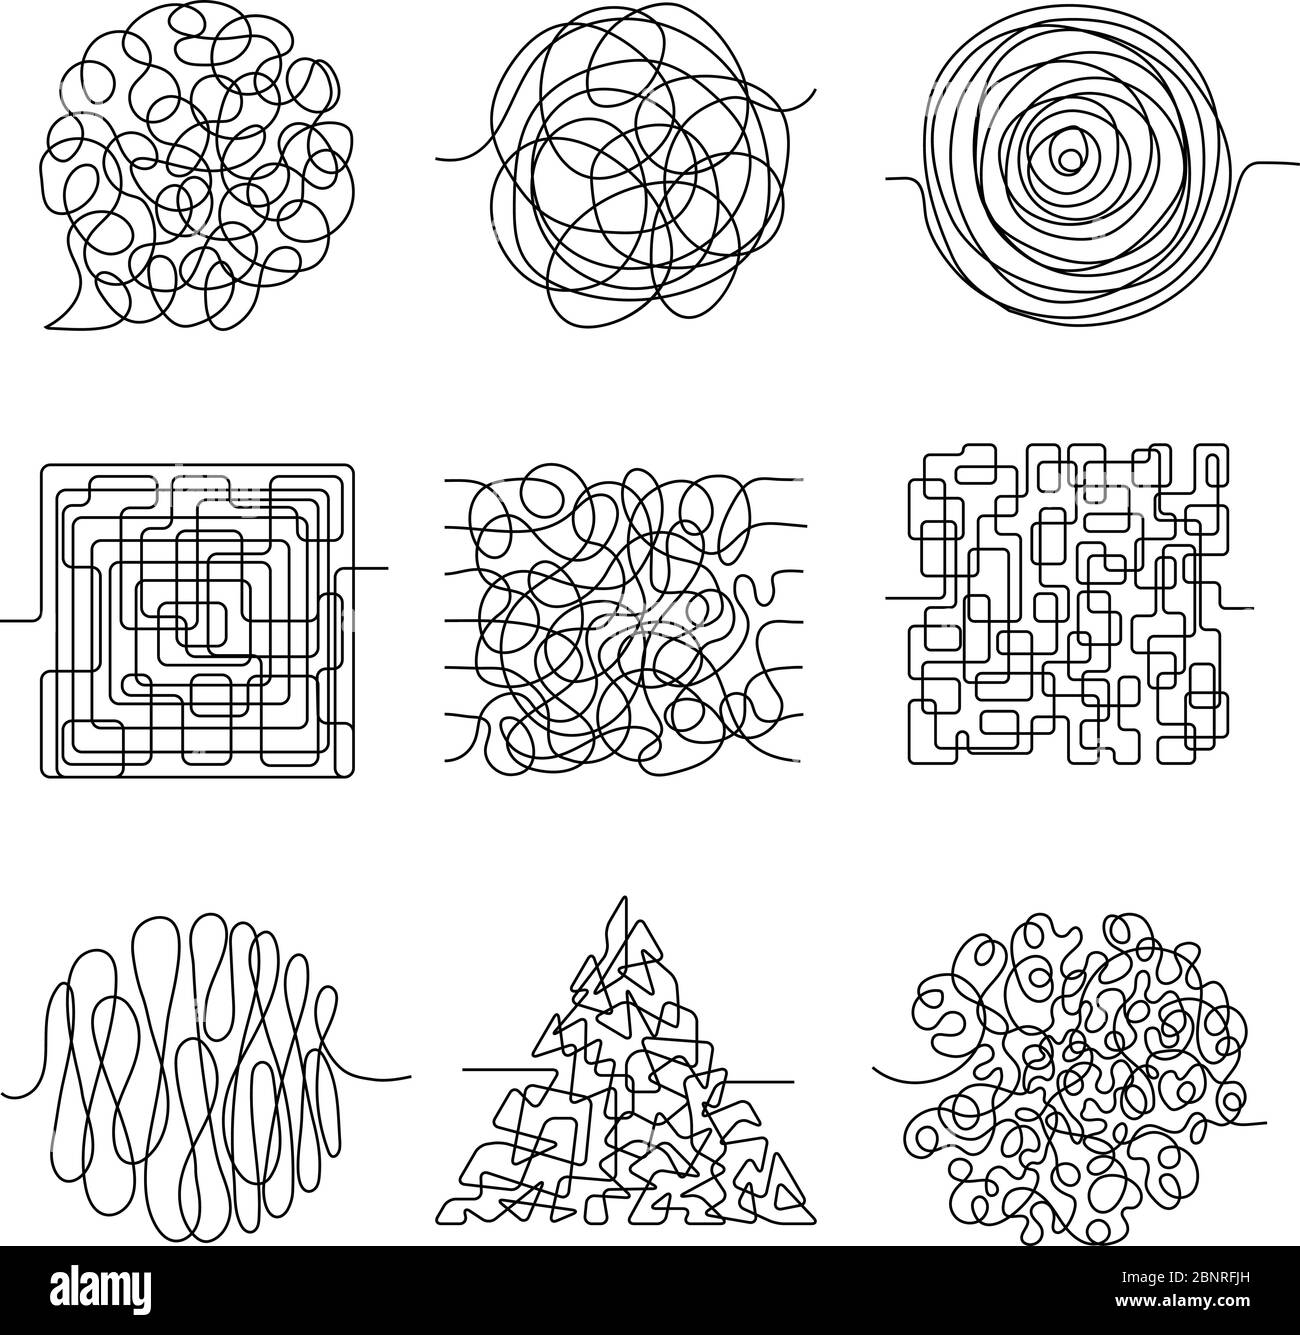 Chaos lines. Scribble messy shape threading pattern vector abstract forms Stock Vector